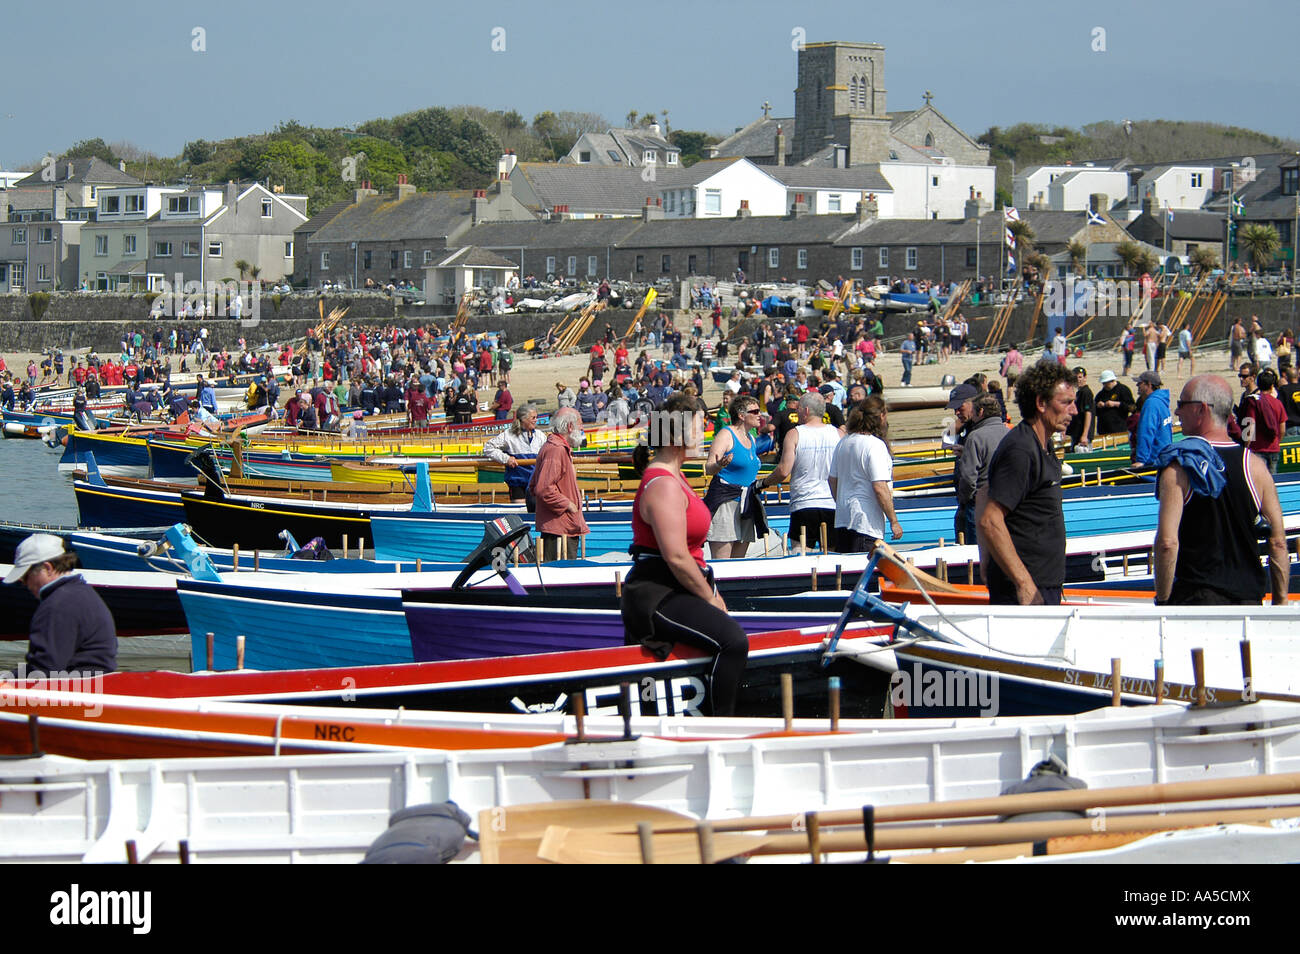 Crews prepare to race in the World Pilot Gig Championships, Hughtown, St Mary's, Isles of Scilly, UK Stock Photo